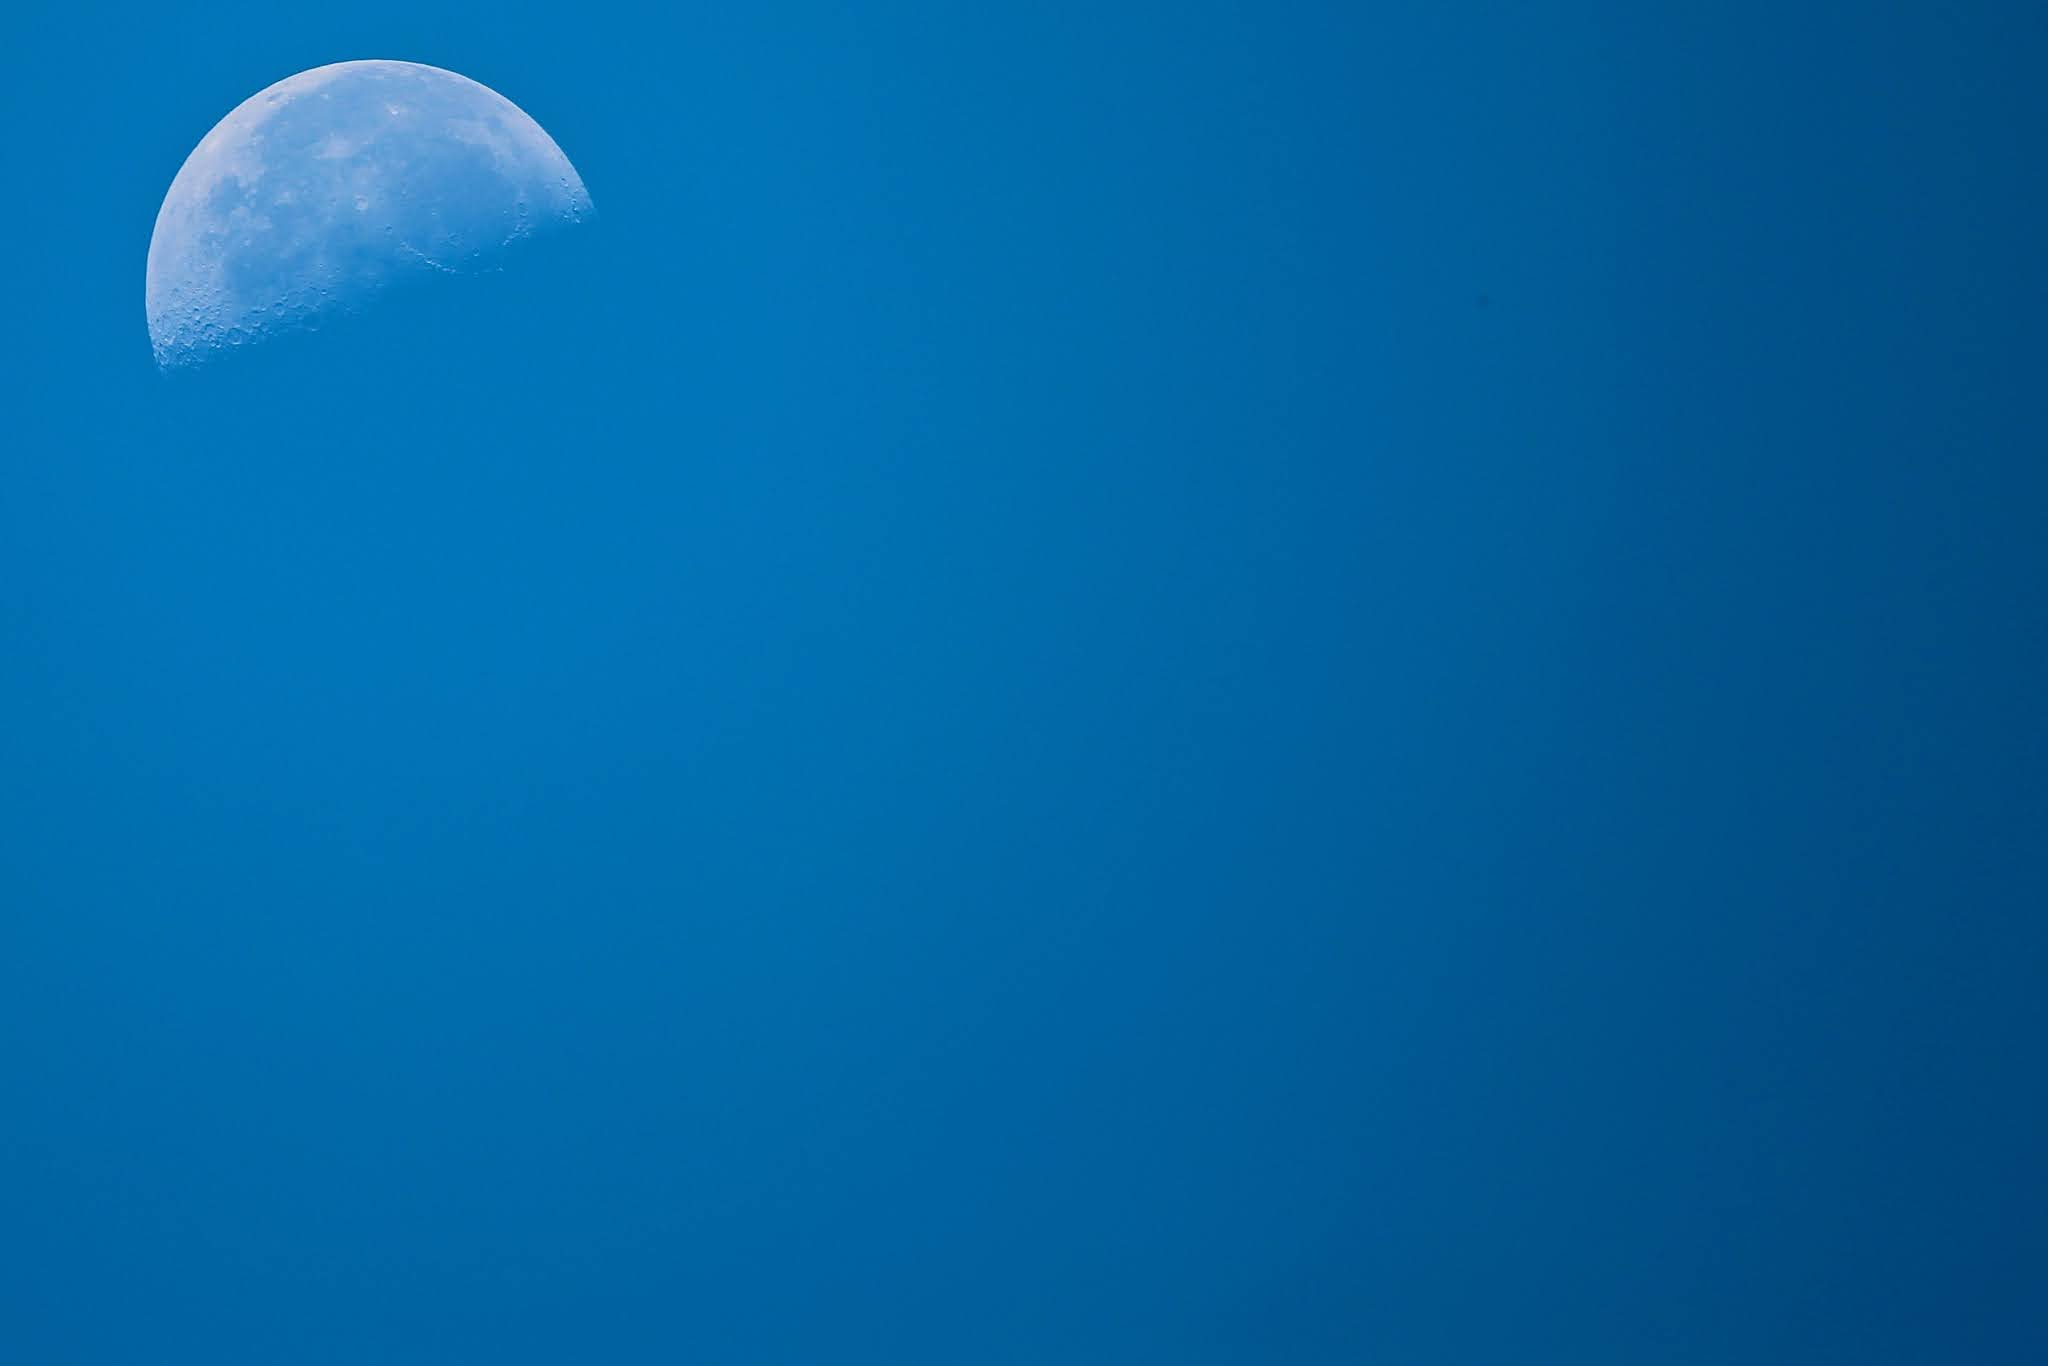 Moon in the clear blue sky background for presentations, high resolution free